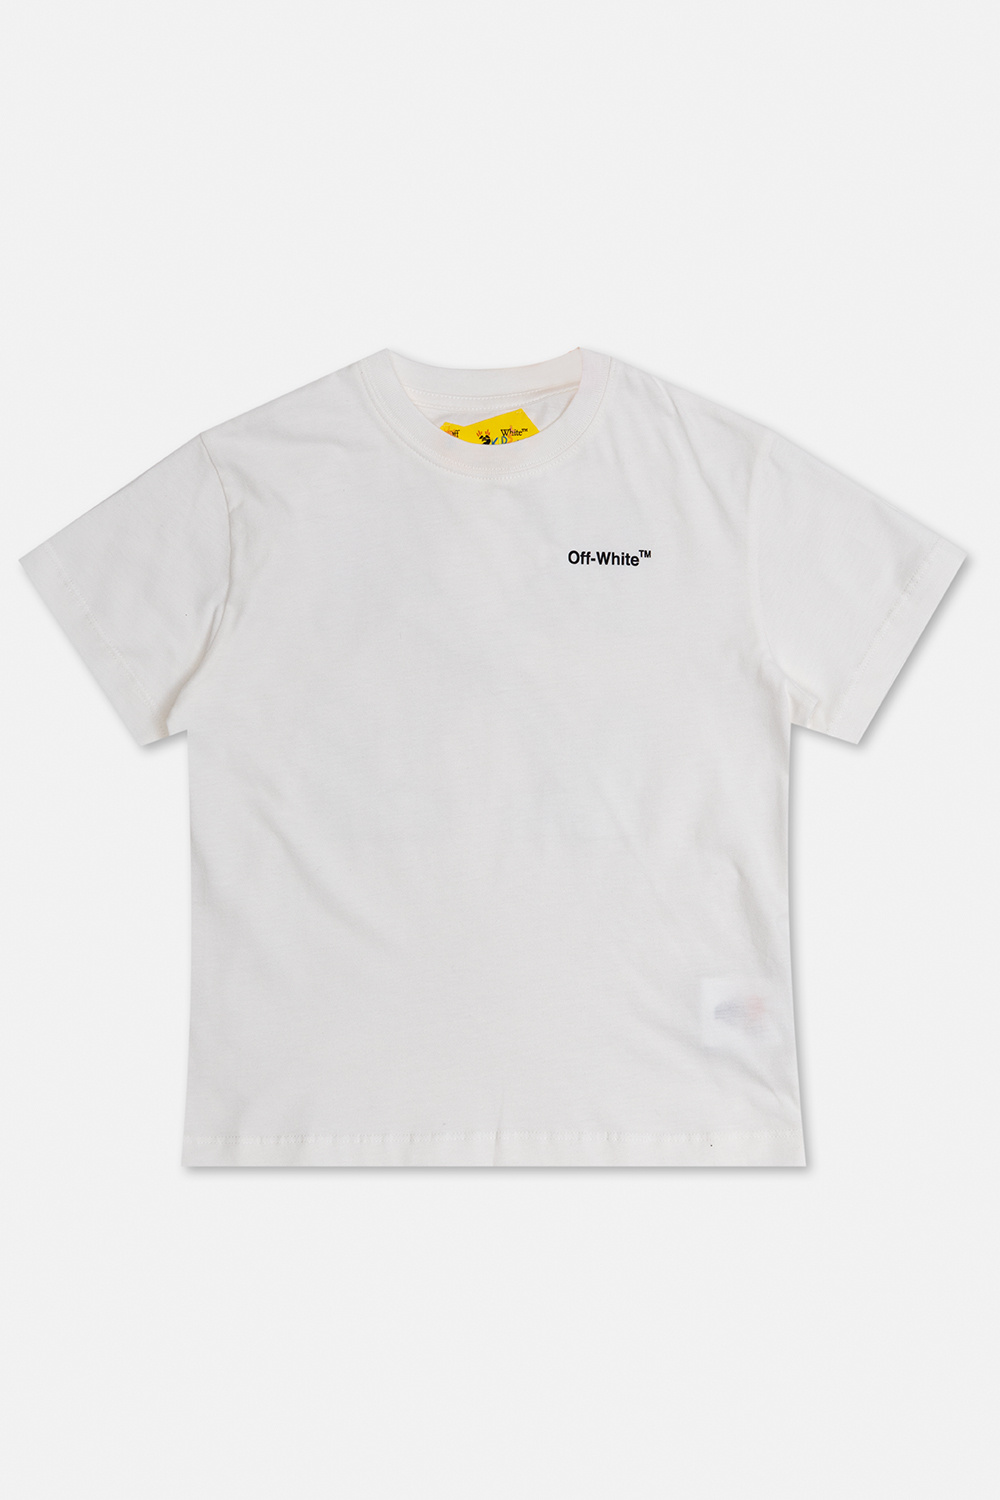 Off-White Kids T-shirt Encolure with logo